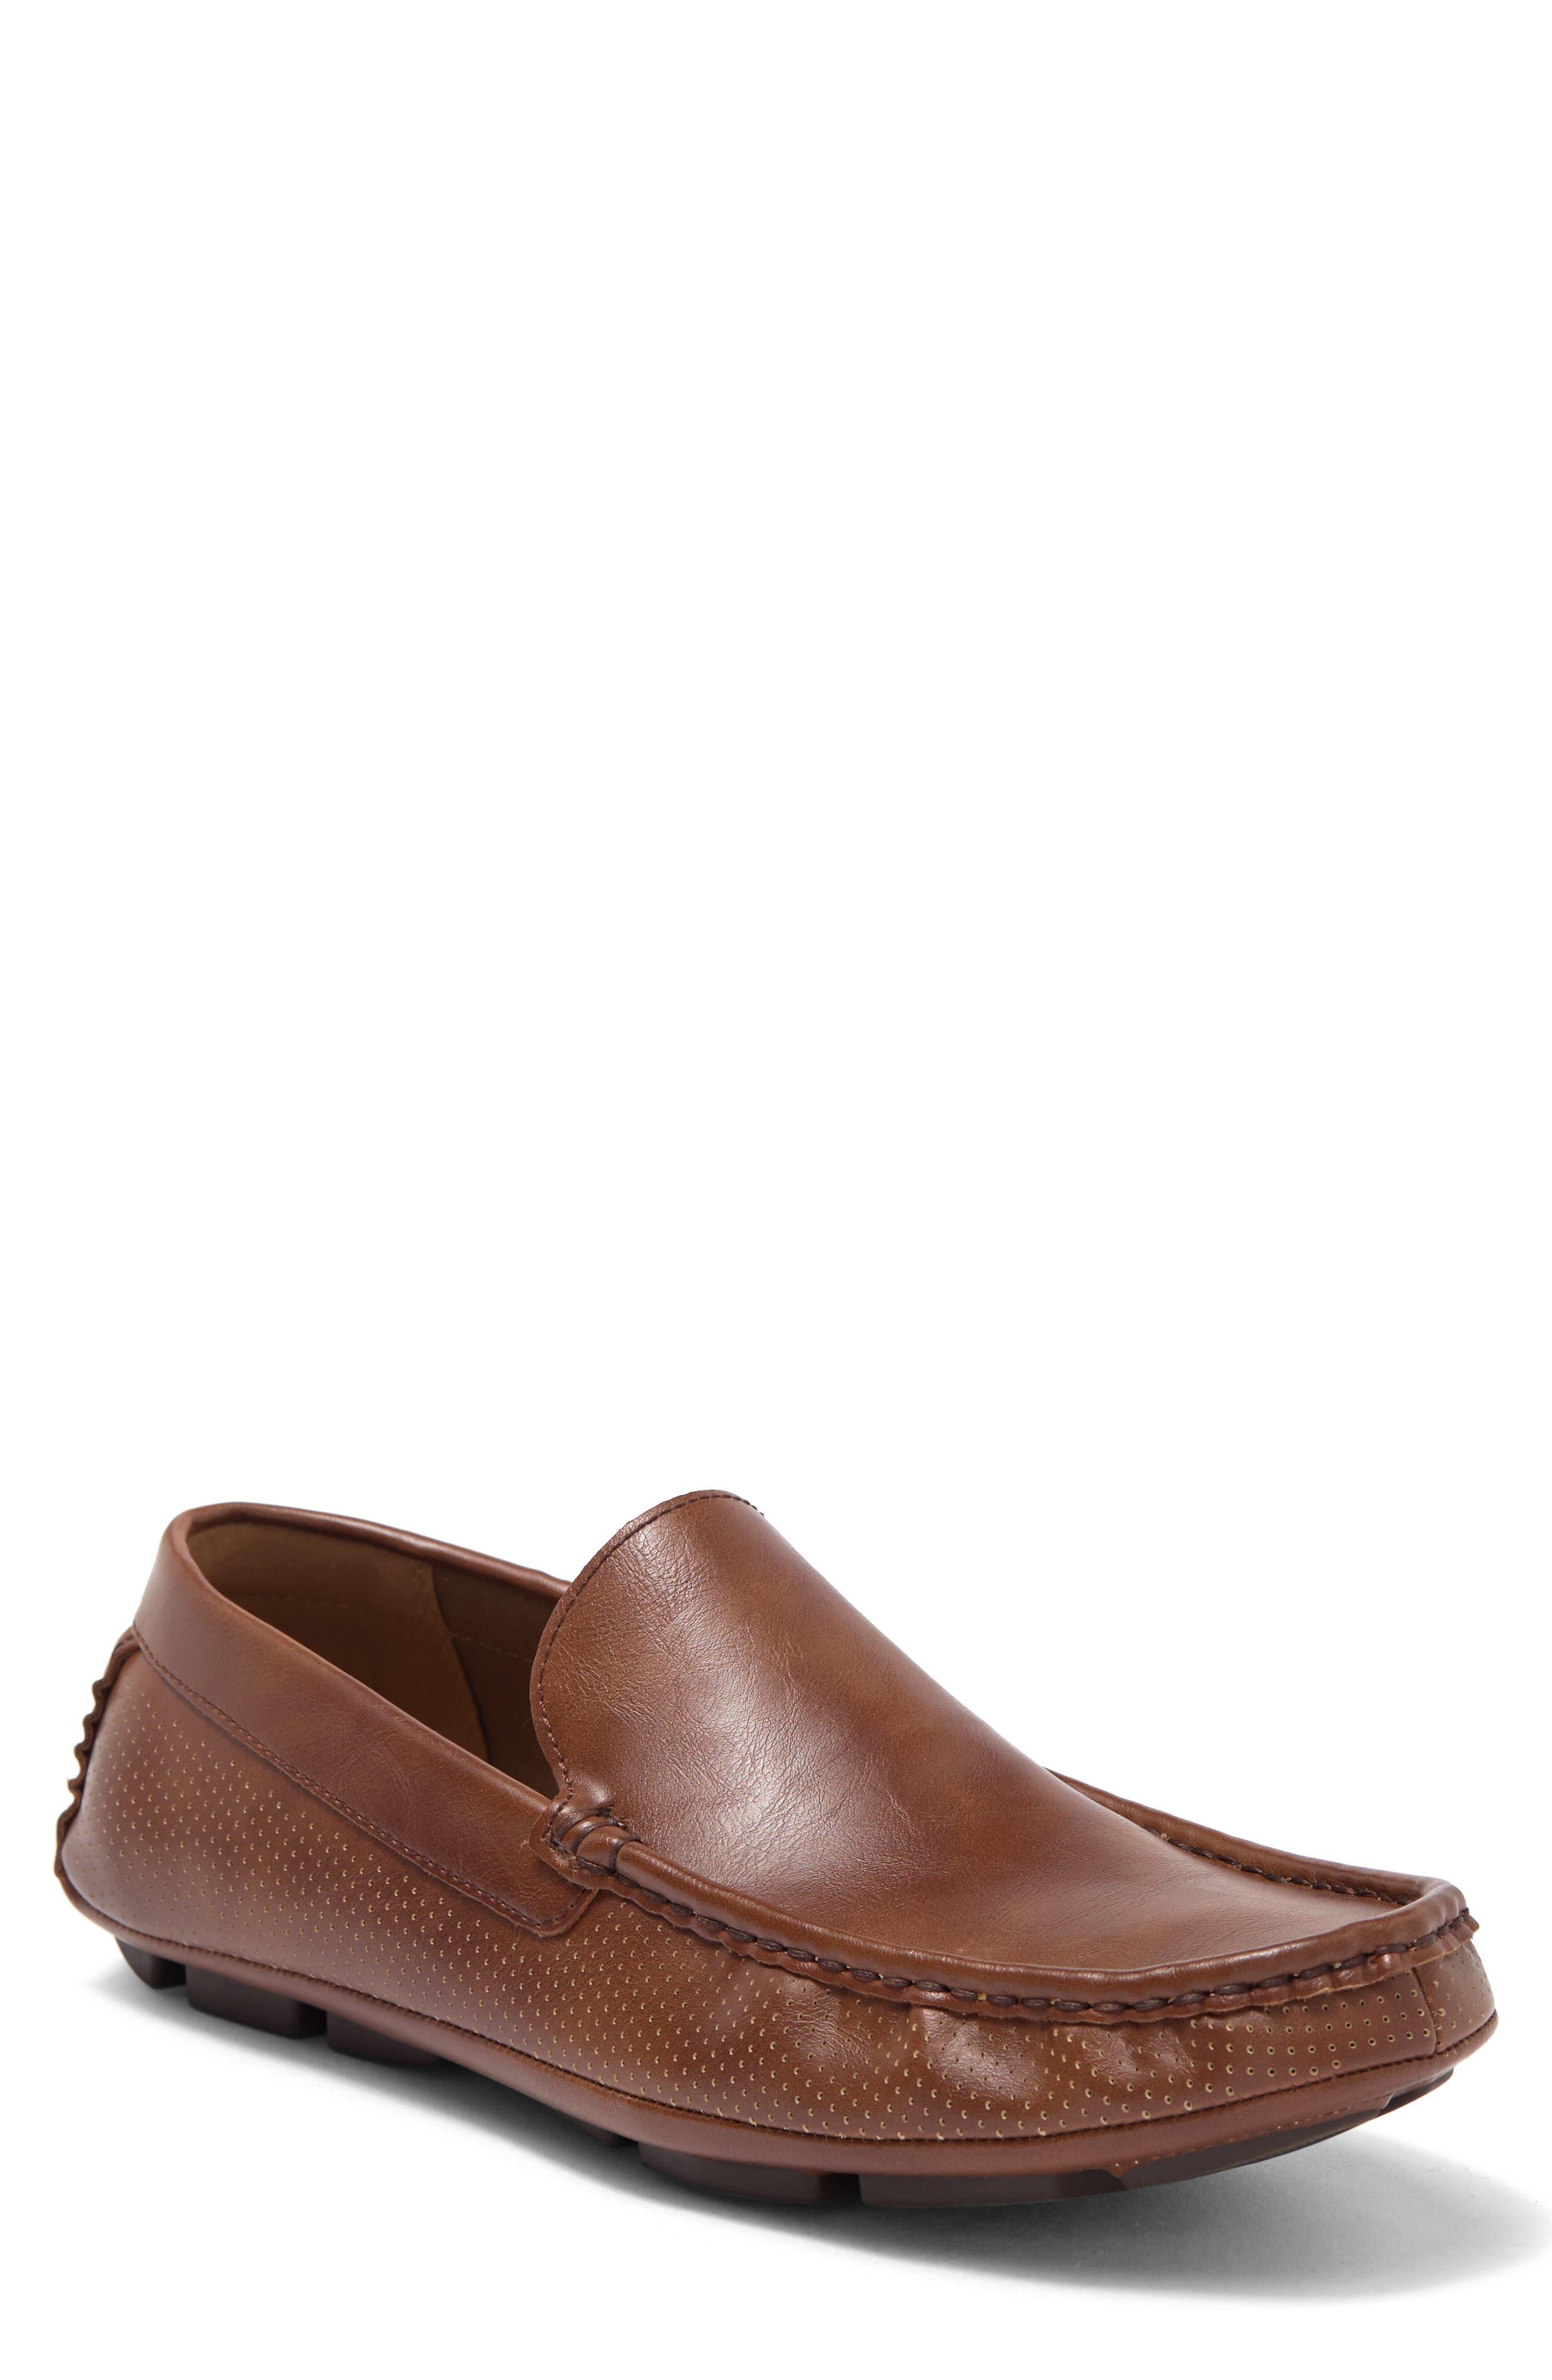 Men's Synthetic Loafers & Slip-Ons